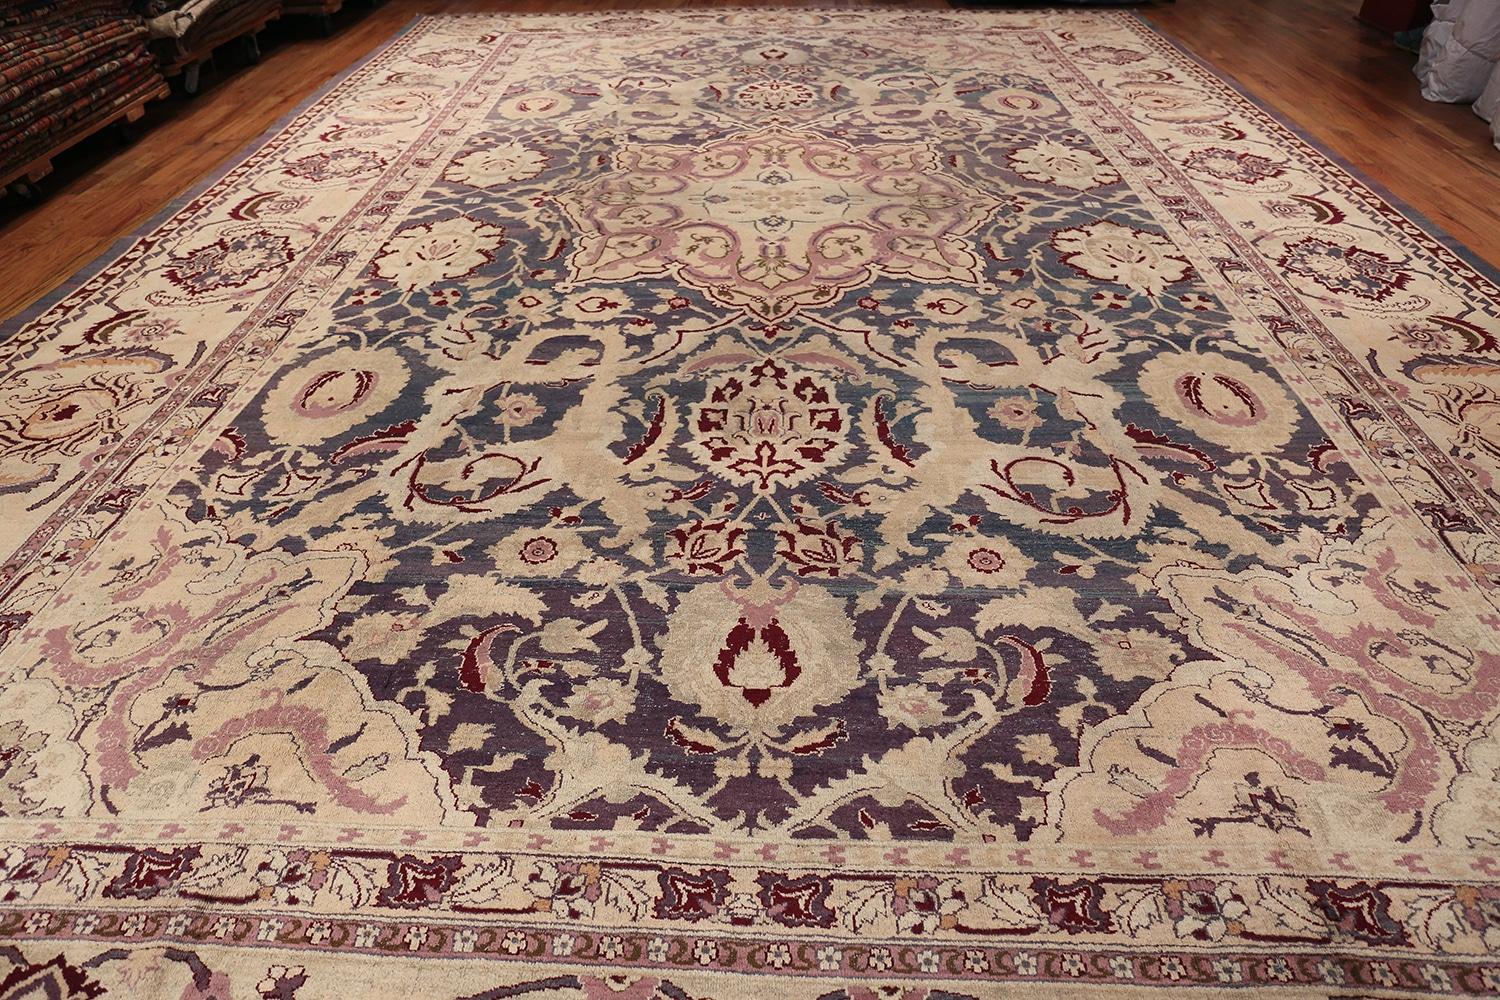 Magnificent light purple color background large oversize antique Indian Agra rug, country of origin: India, circa late 19th century, size: 14 ft. x 20 ft. 10 in (4.27 m x 6.35 m)

This antique Indian carpet created in Agra features a splendid